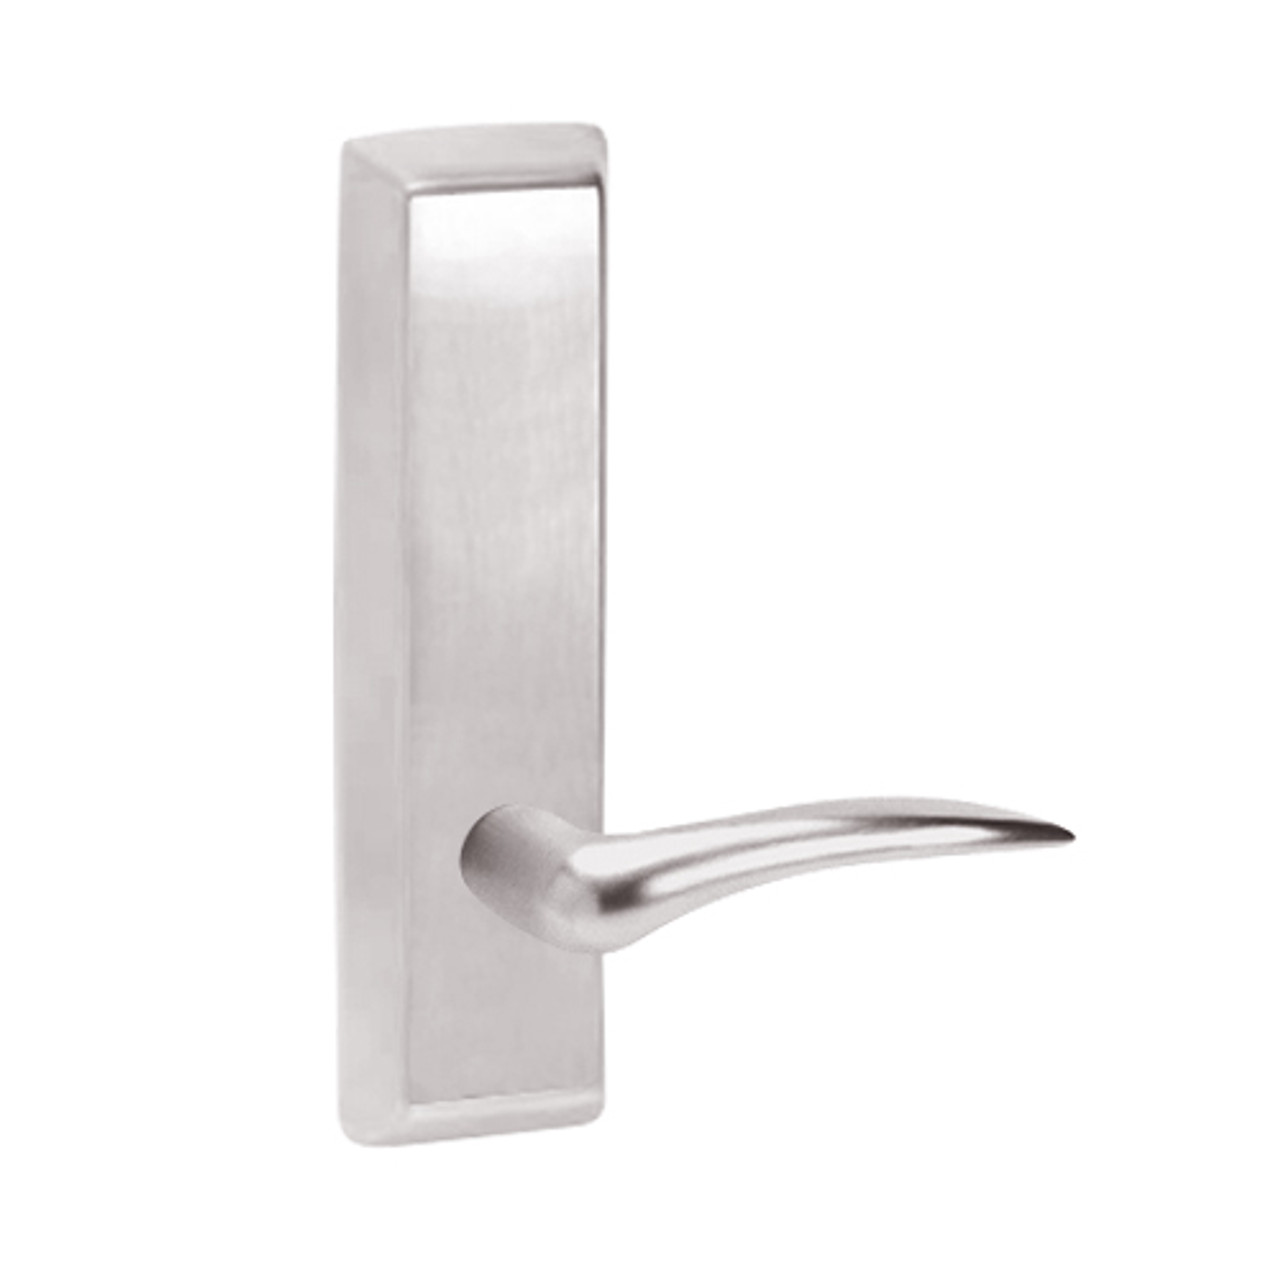 D950-629-LHR Corbin ED5000 Series Exit Device Trim with Dummy Dirke Lever in Bright Stainless Steel Finish